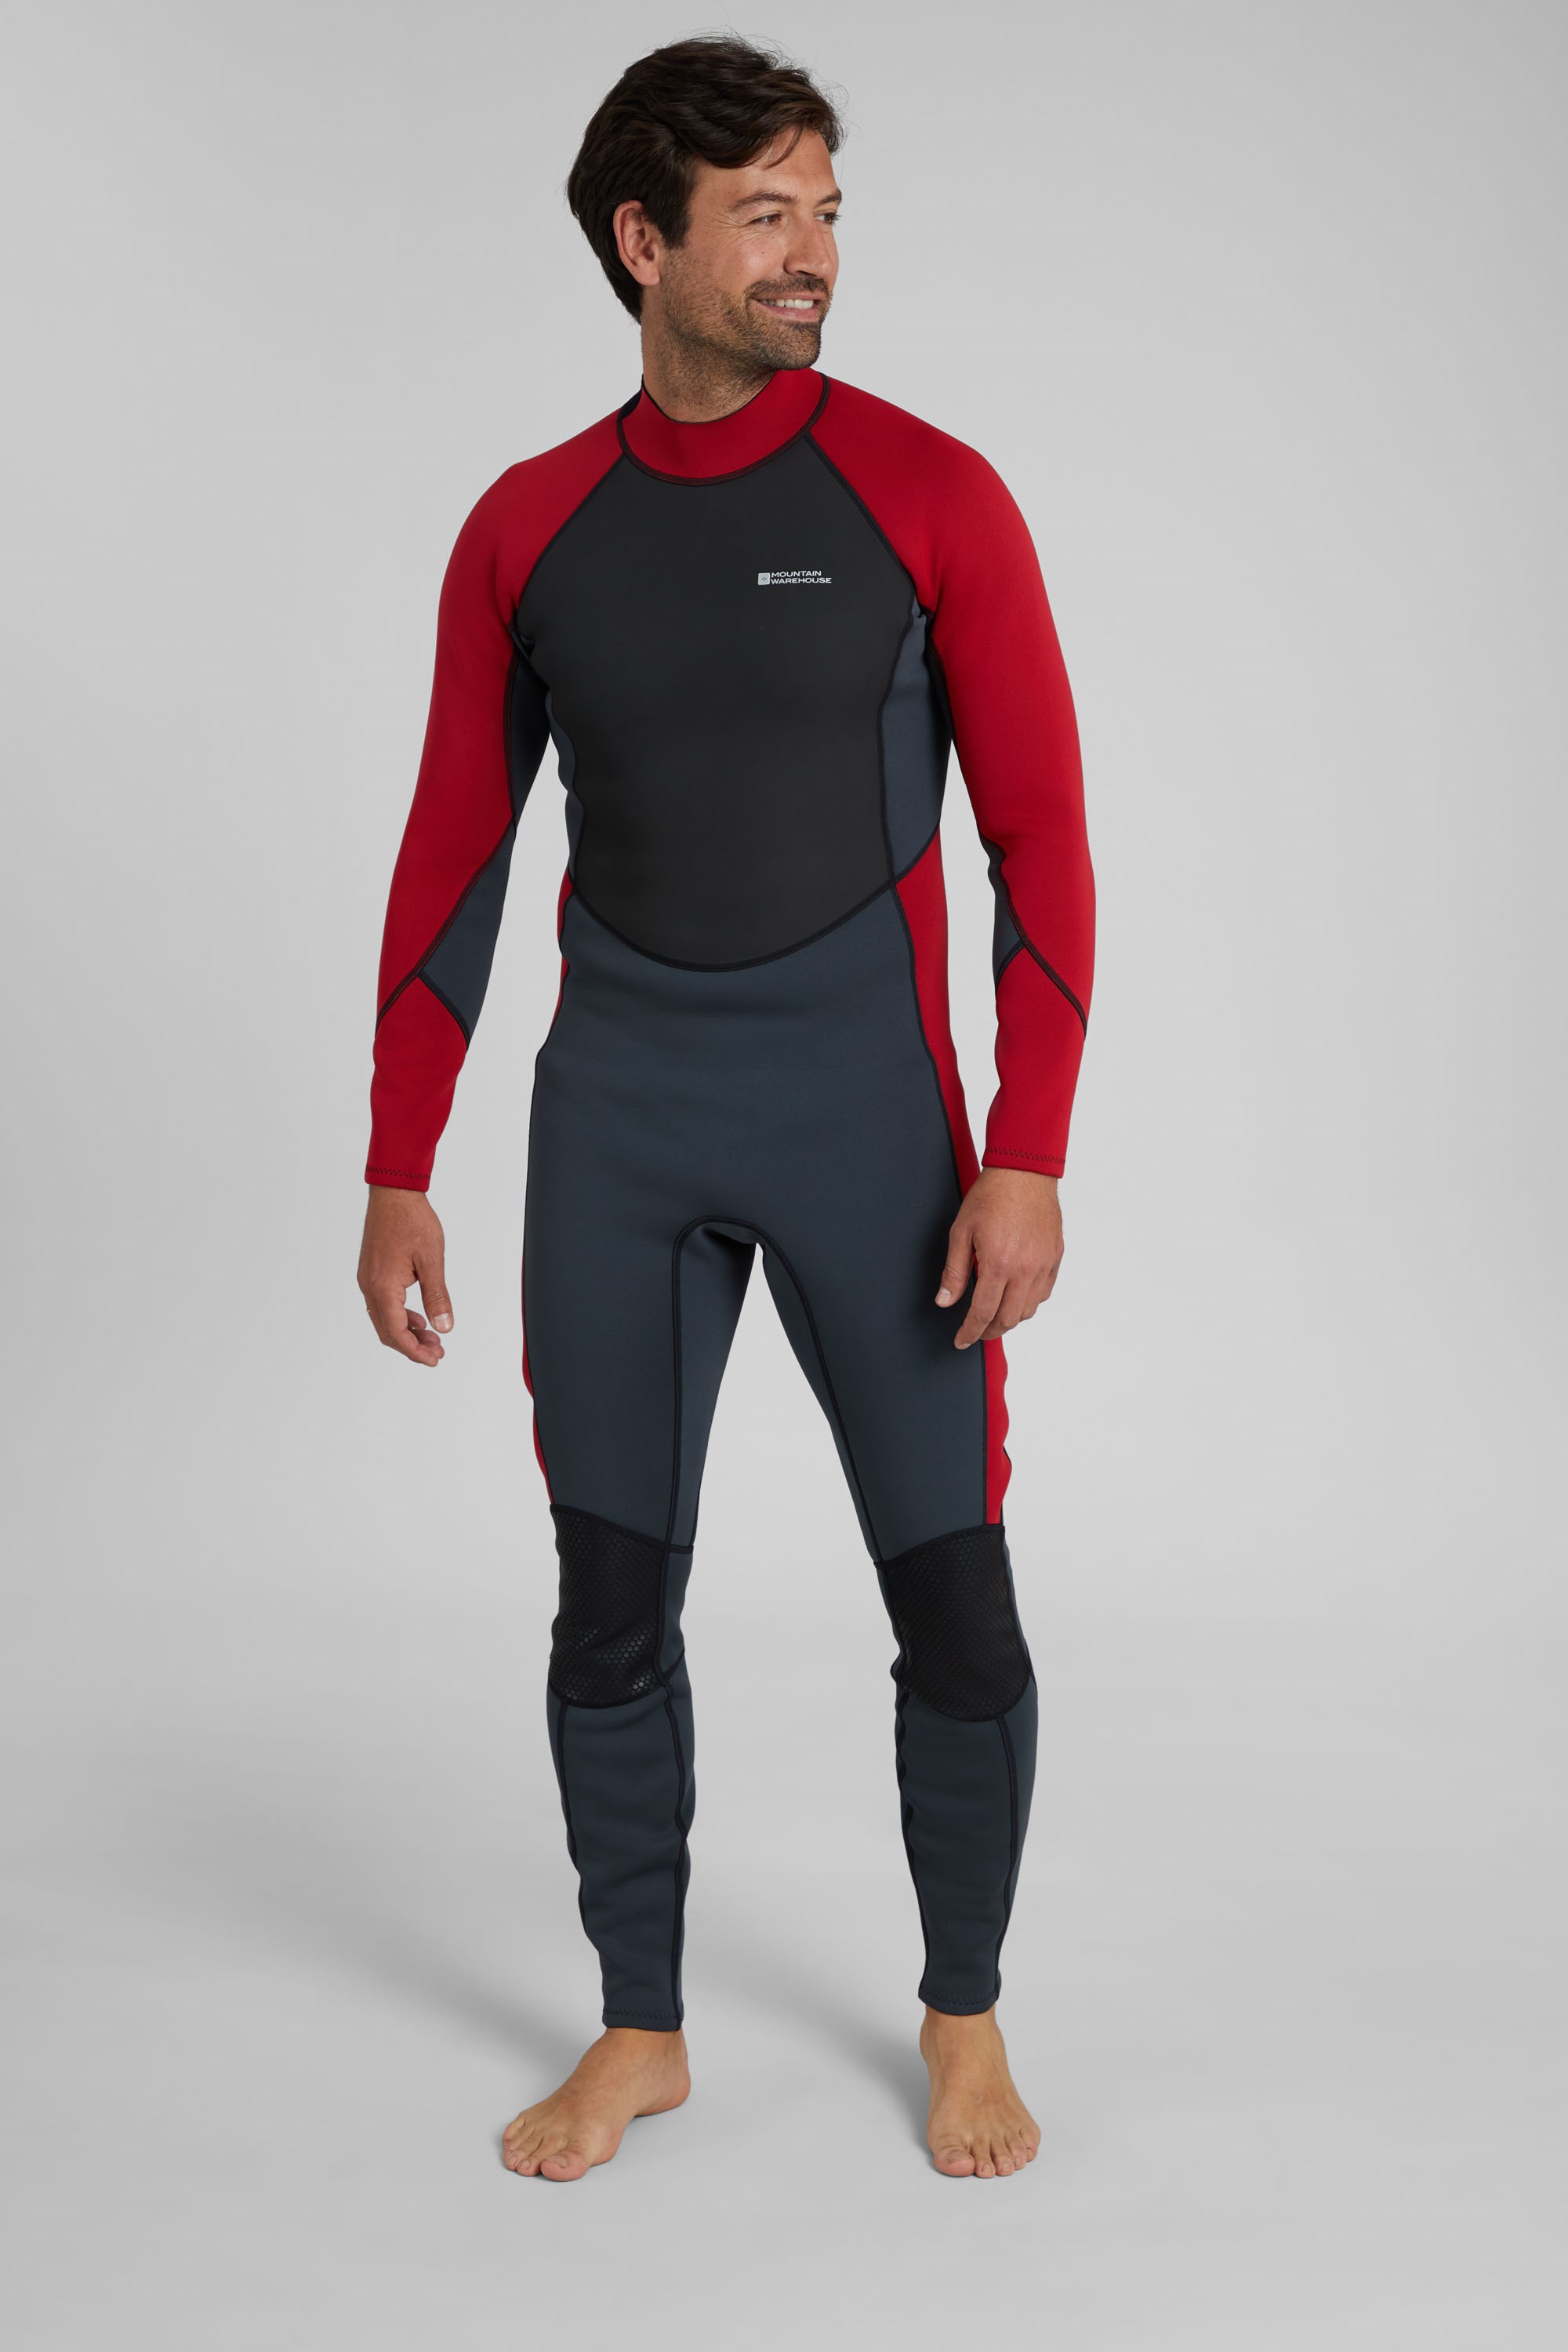 Mountain Warehouse Mens Wetsuit with Neoprene Fabric and Flat Seams 2.5 mm 